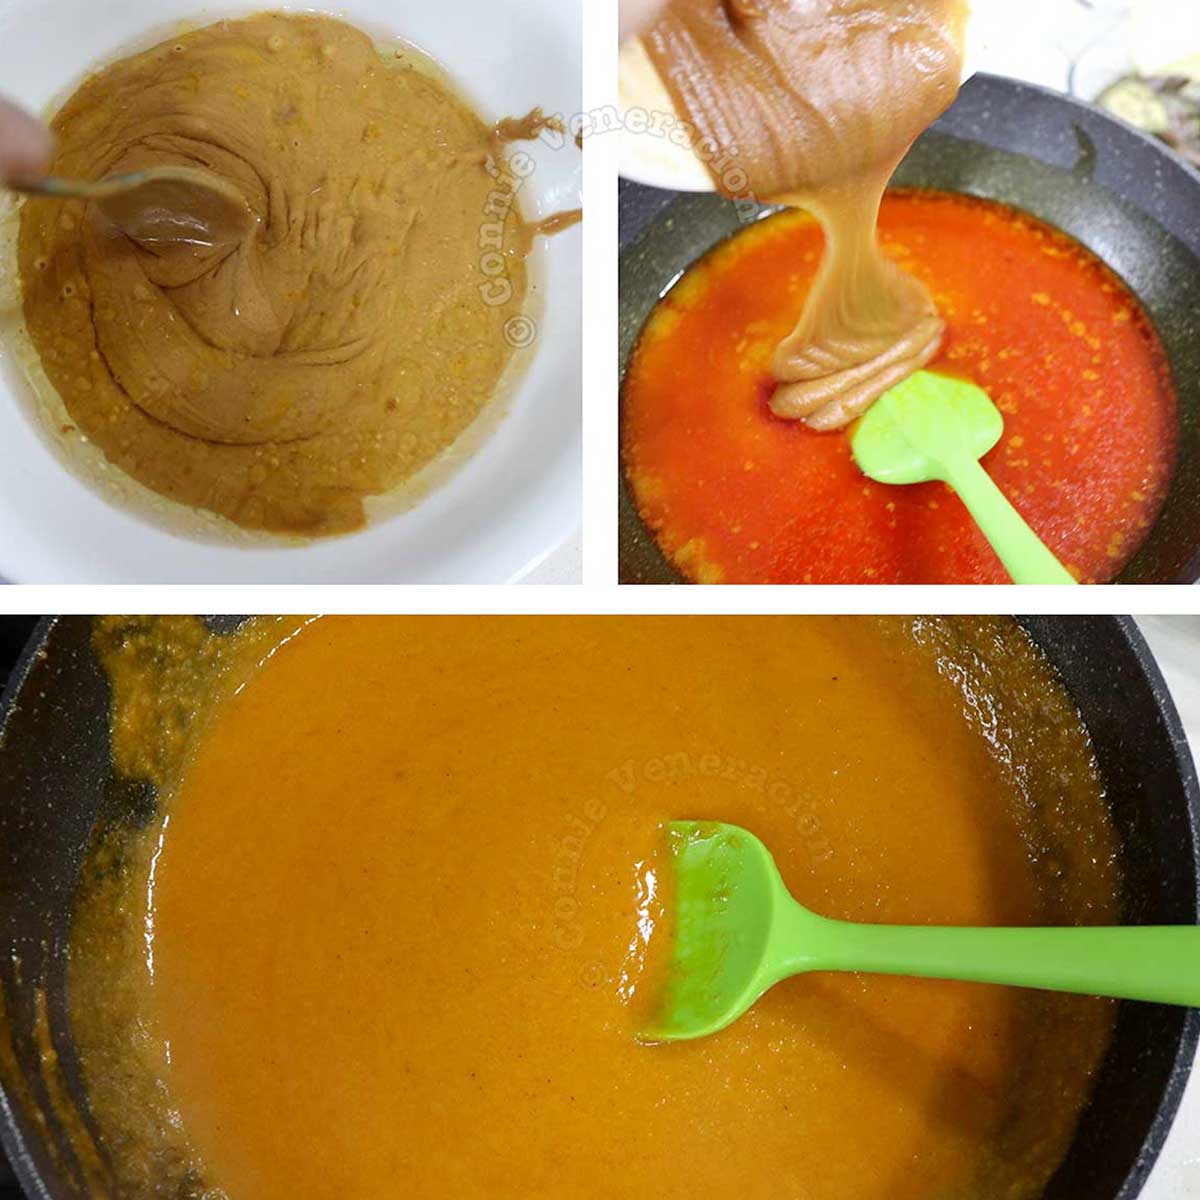 Making kare-kare sauce with peanut butter